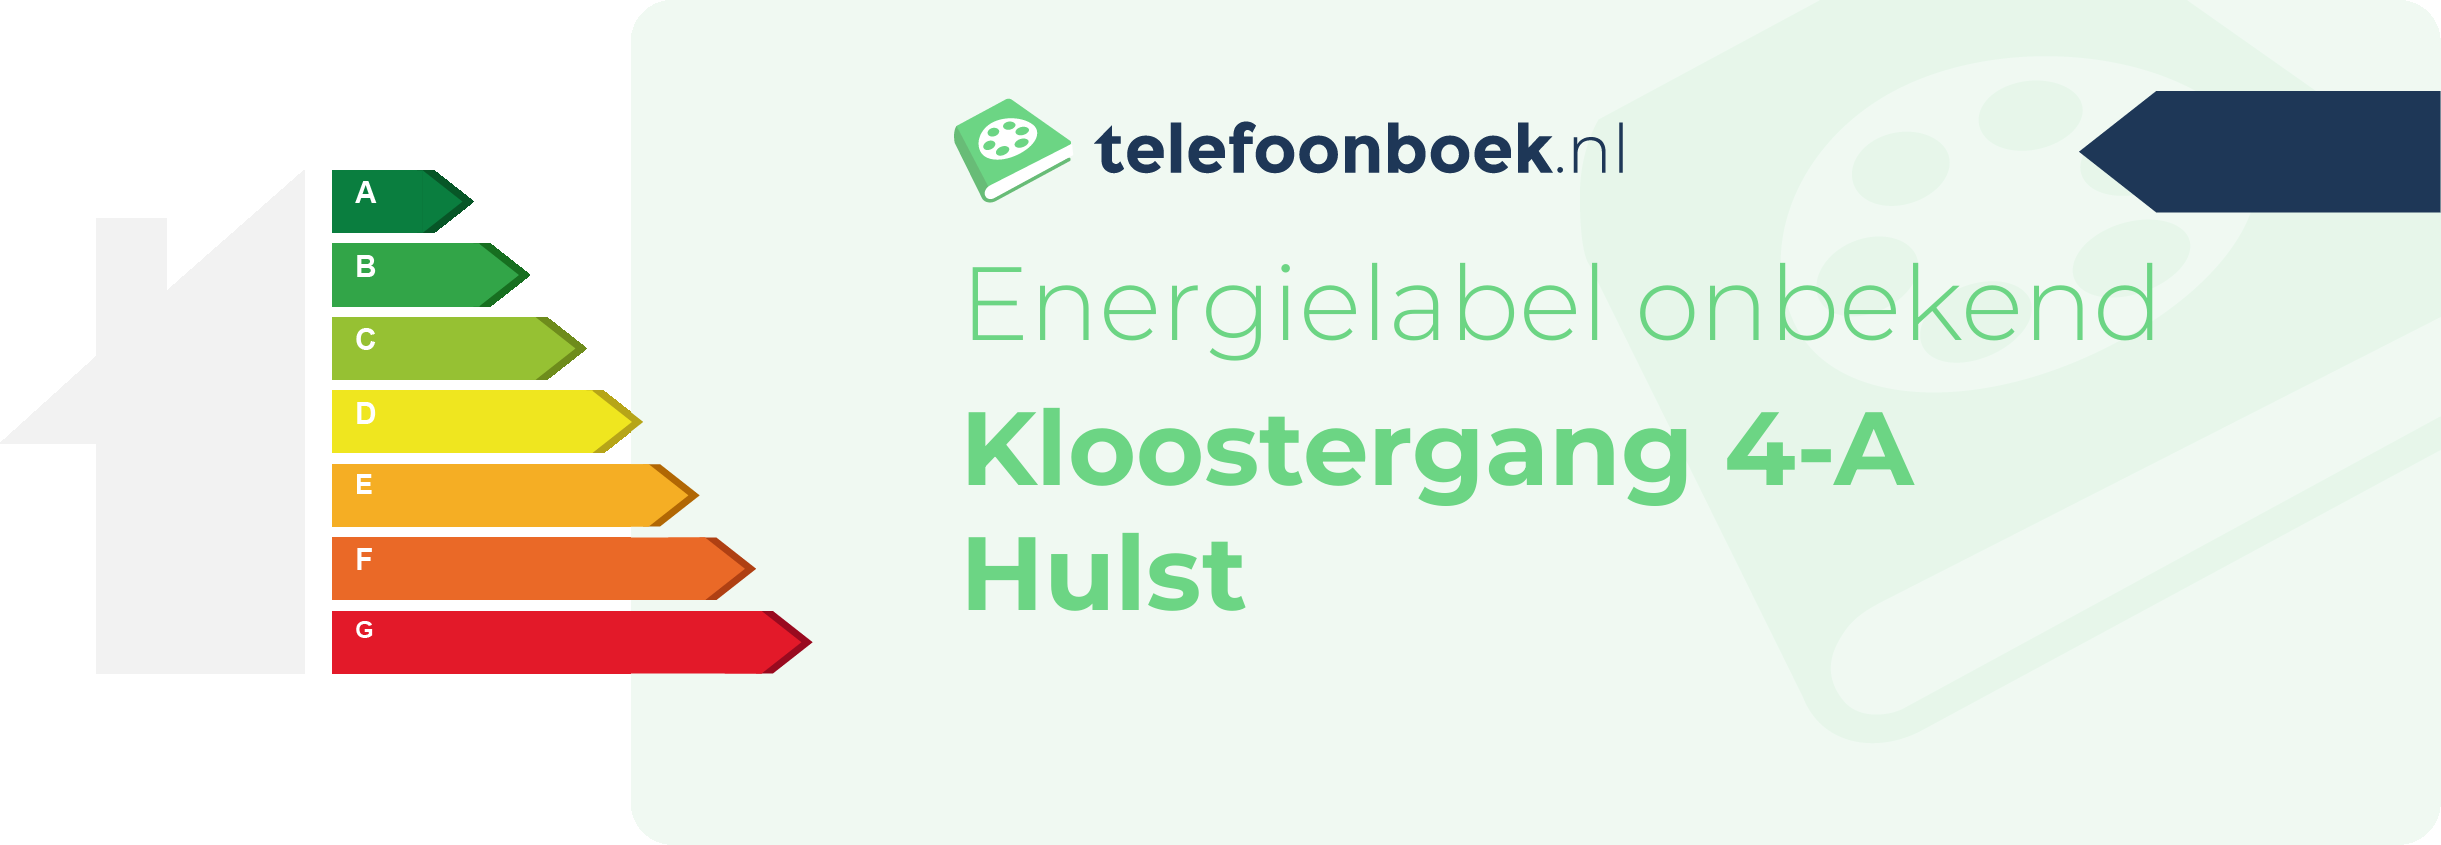 Energielabel Kloostergang 4-A Hulst